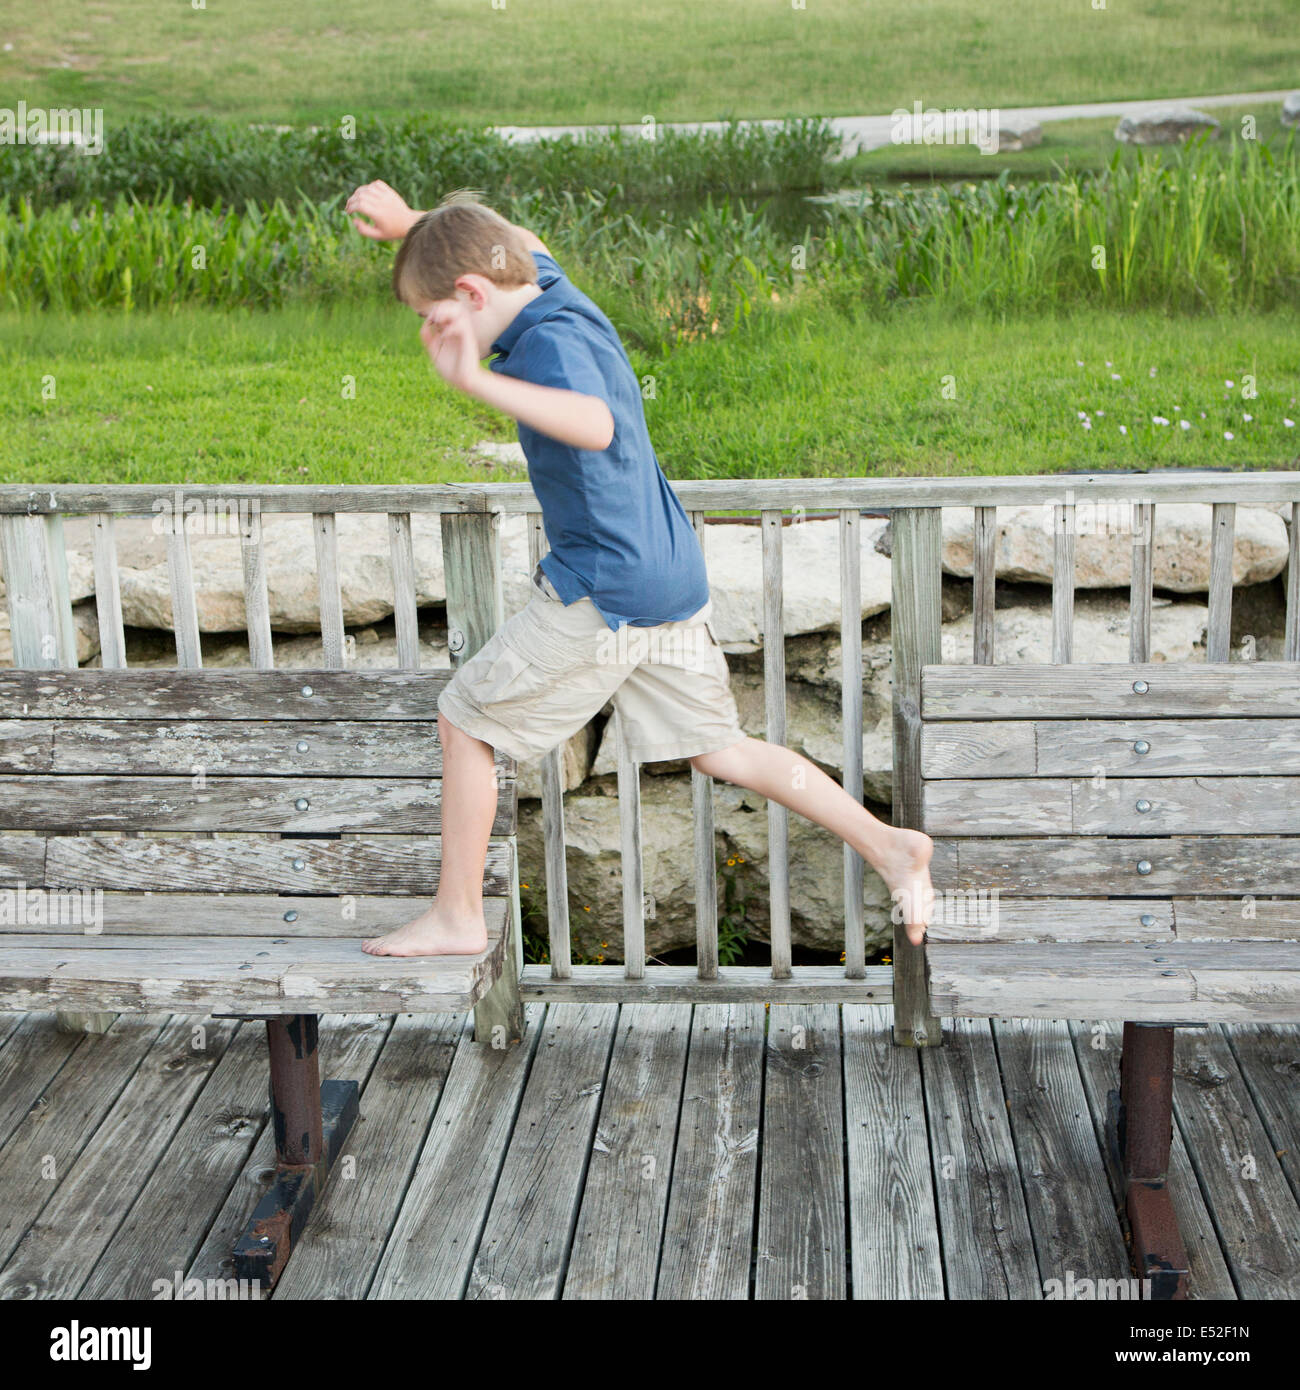 A young boy outdoors leaping from one bench to another on a jetty over water. Stock Photo